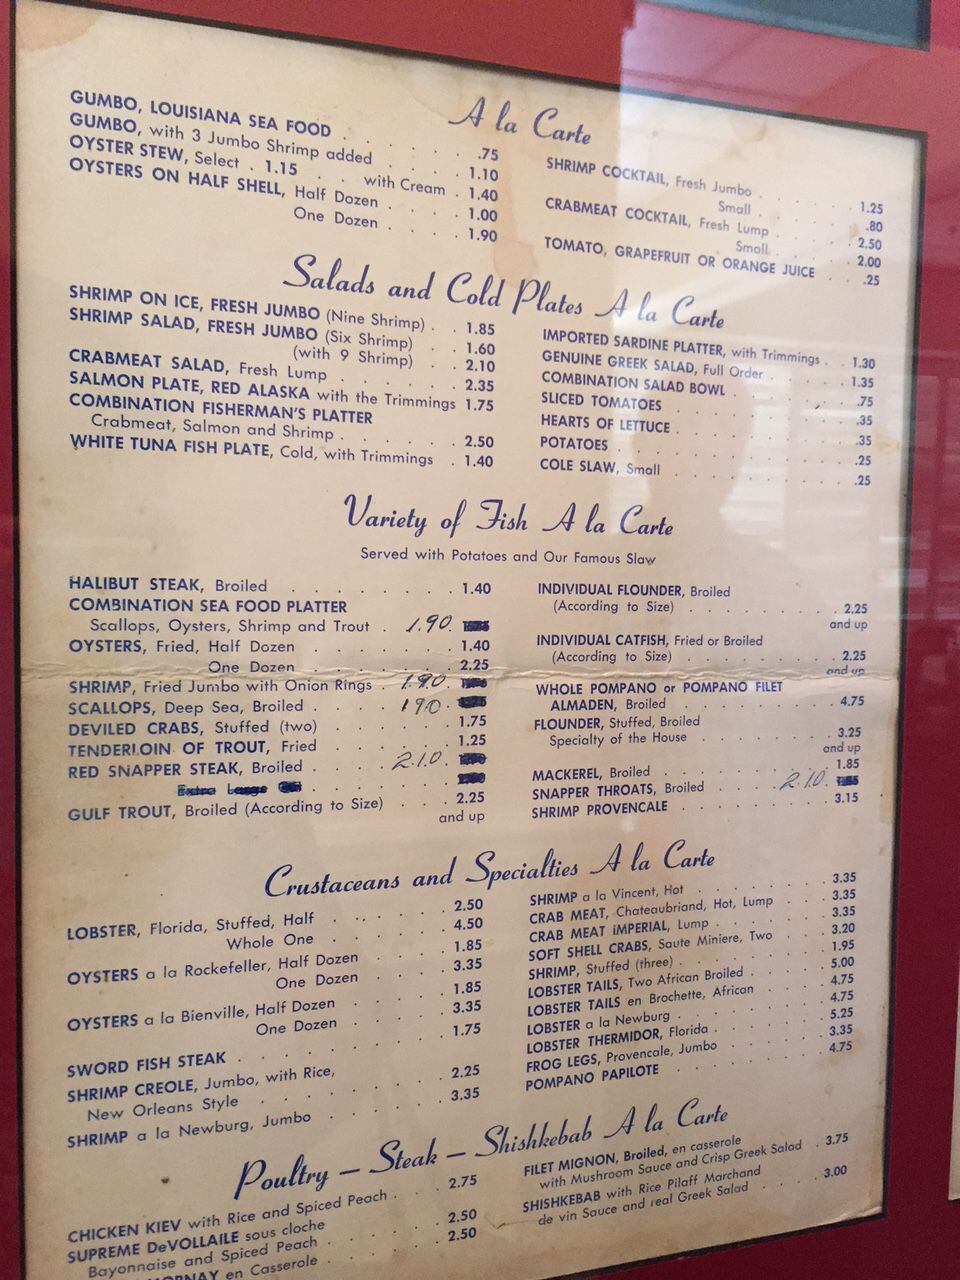 
Vincent’s Seafood put a menu from 1962 in a display case.
